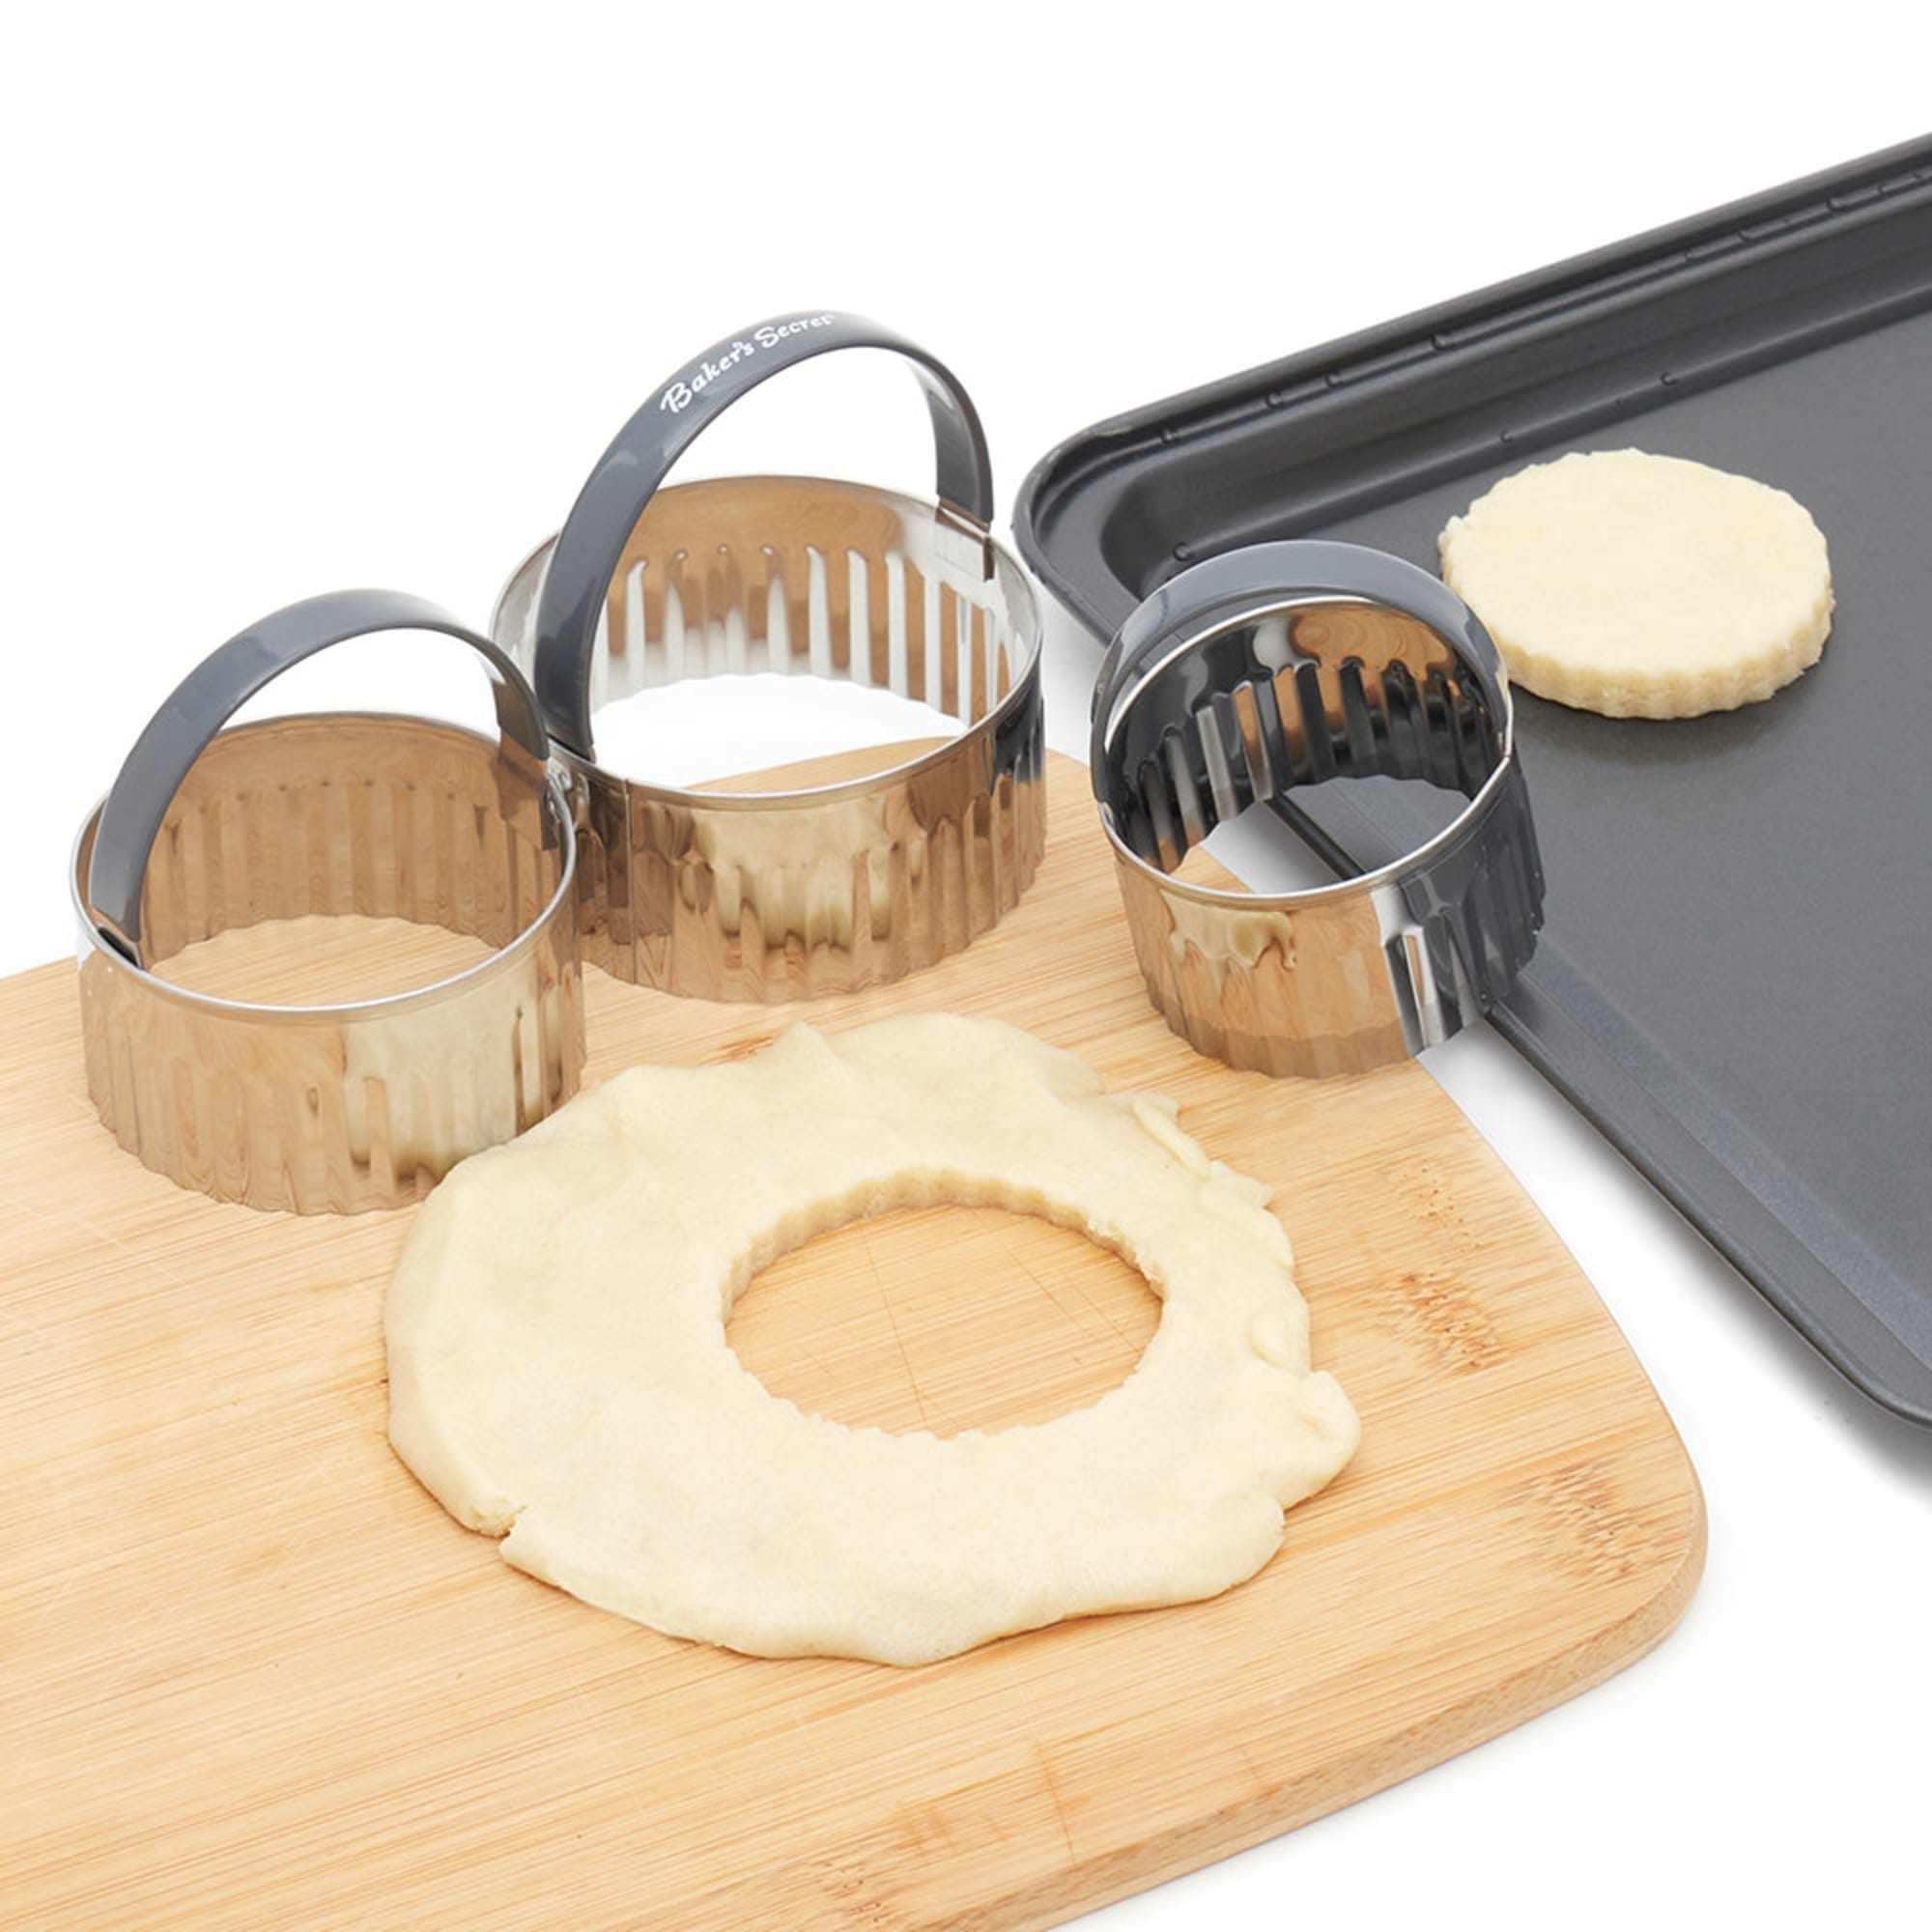 Baker's Secret 3-Piece Round Scalloped Cookie Cutters $4.00 EACH, CASE PACK OF 48